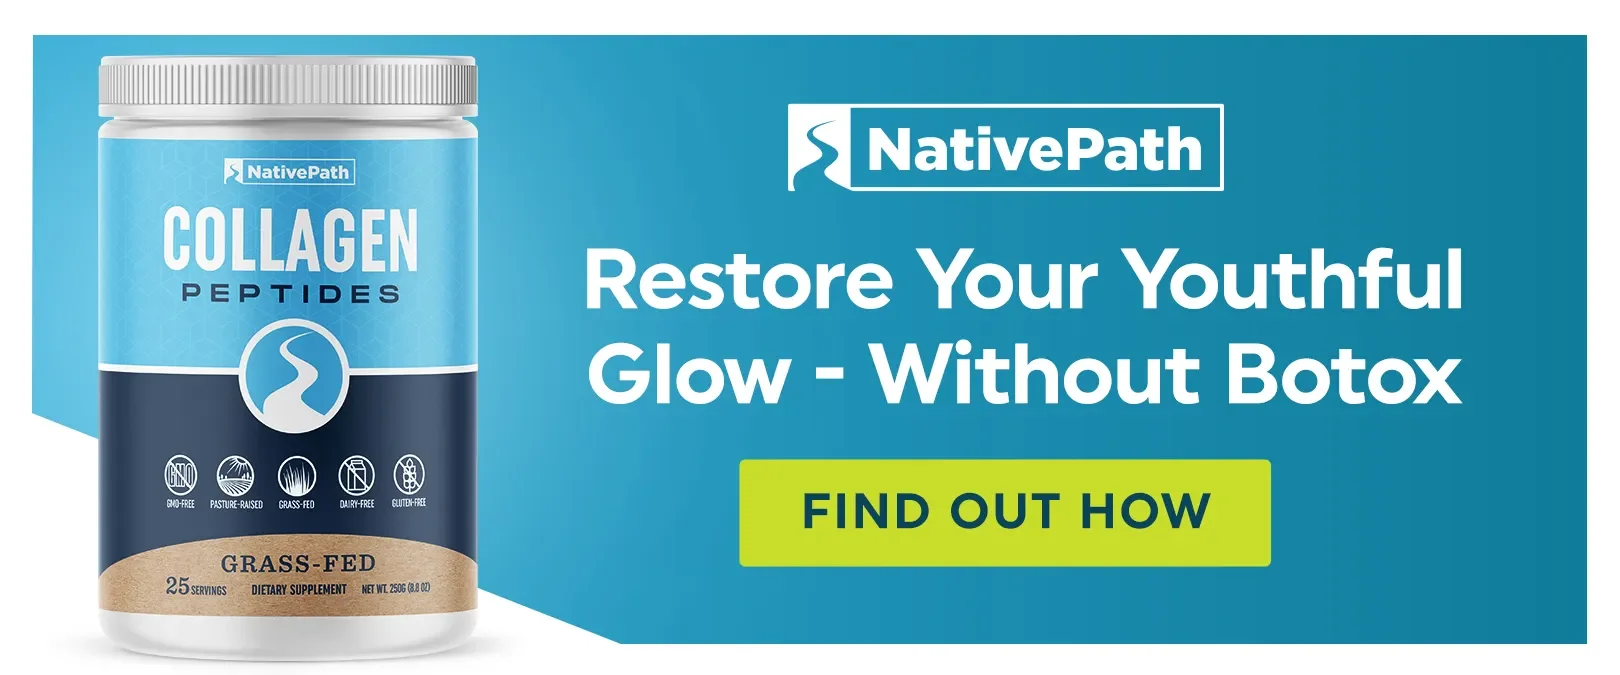 NativePath Grass-Fed Collagen Powder to Restore Your Youthful Glow